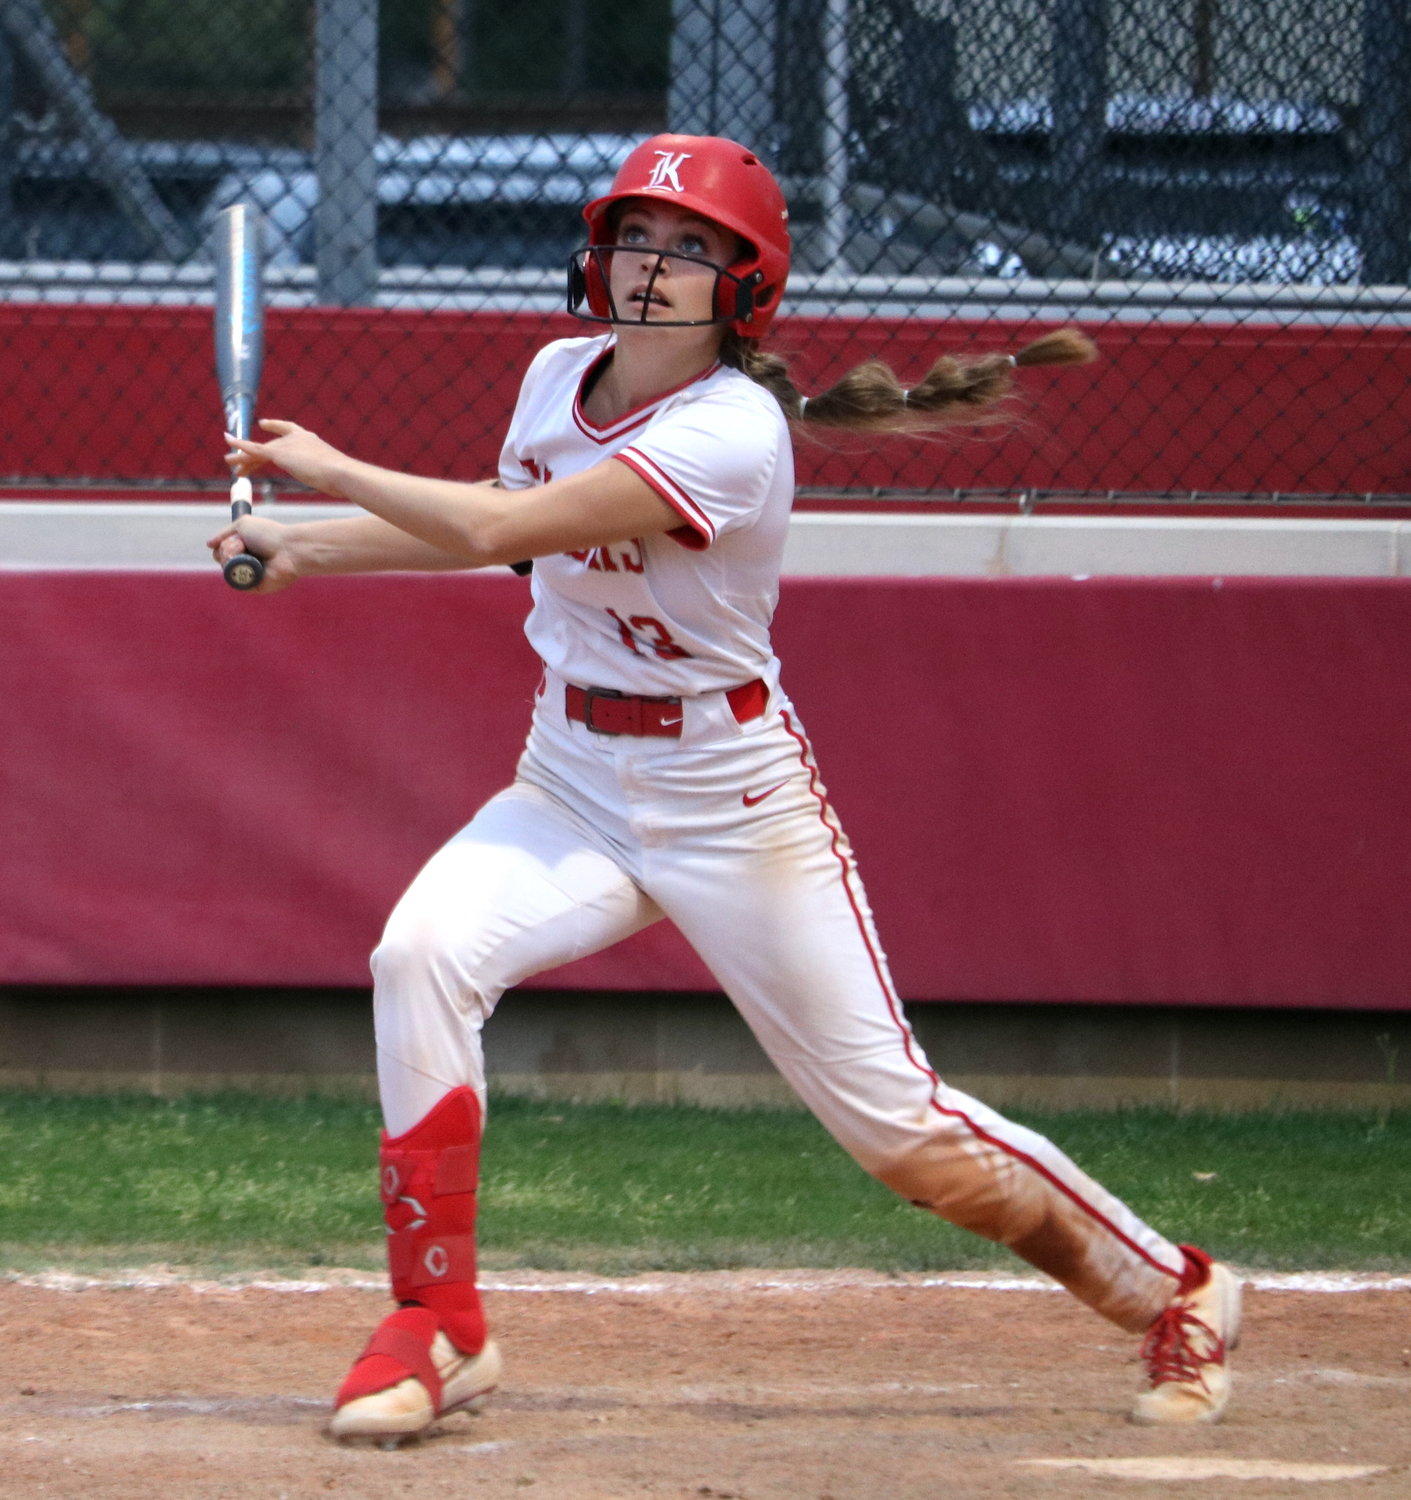 Kailey Wyckoff watches after hitting a ball to left field during a game between Katy and Taylor at the Katy softball field.